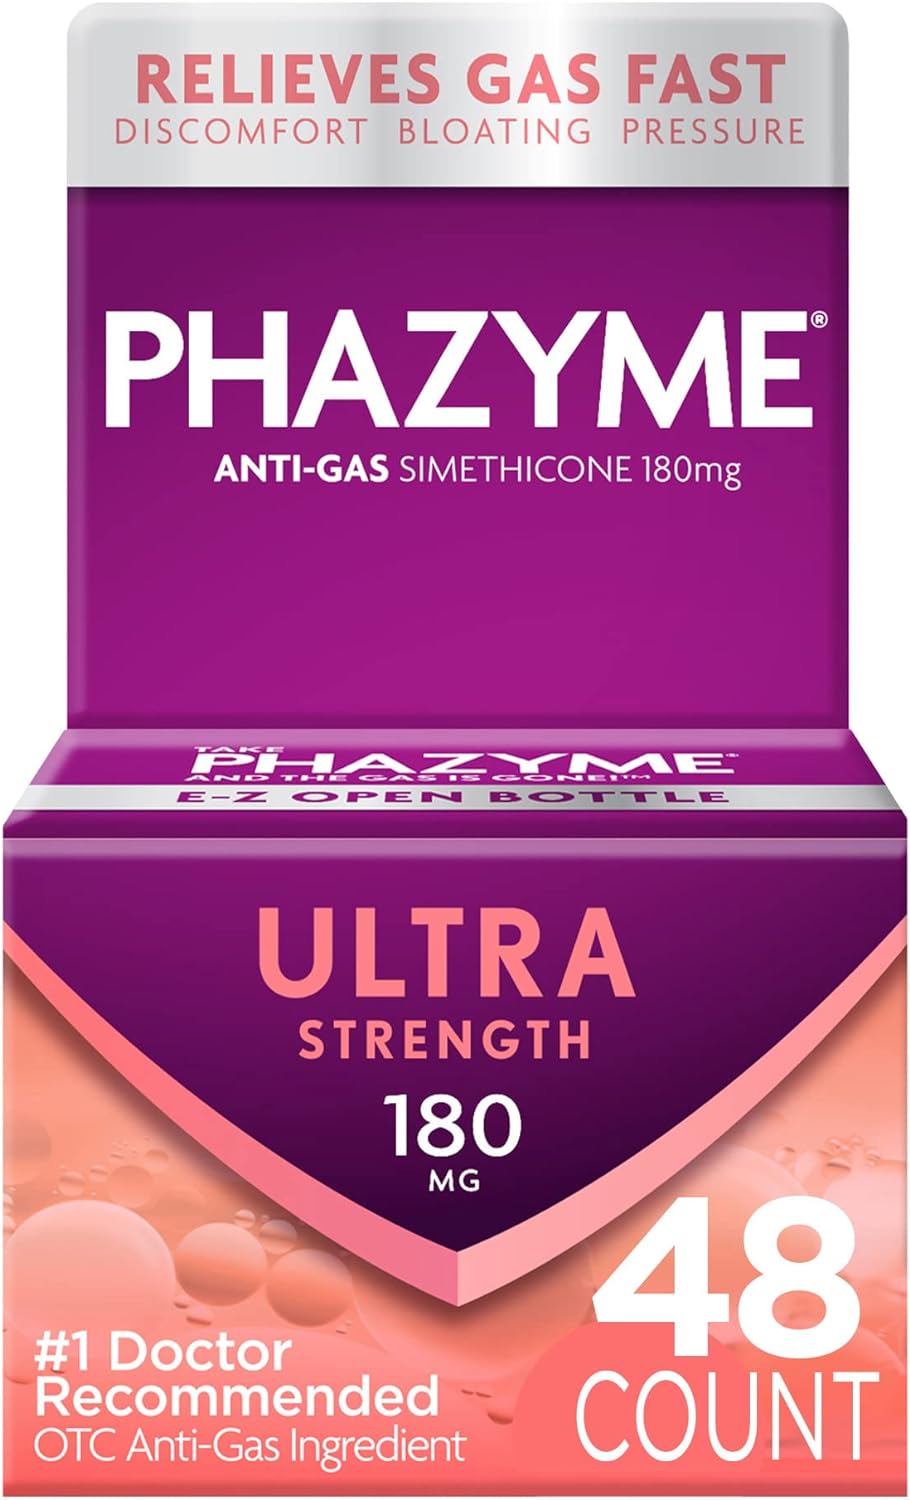 $5.01 w/ S&S: Phazyme Ultra Strength Gas & Bloating Relief, 48 Fast Gels